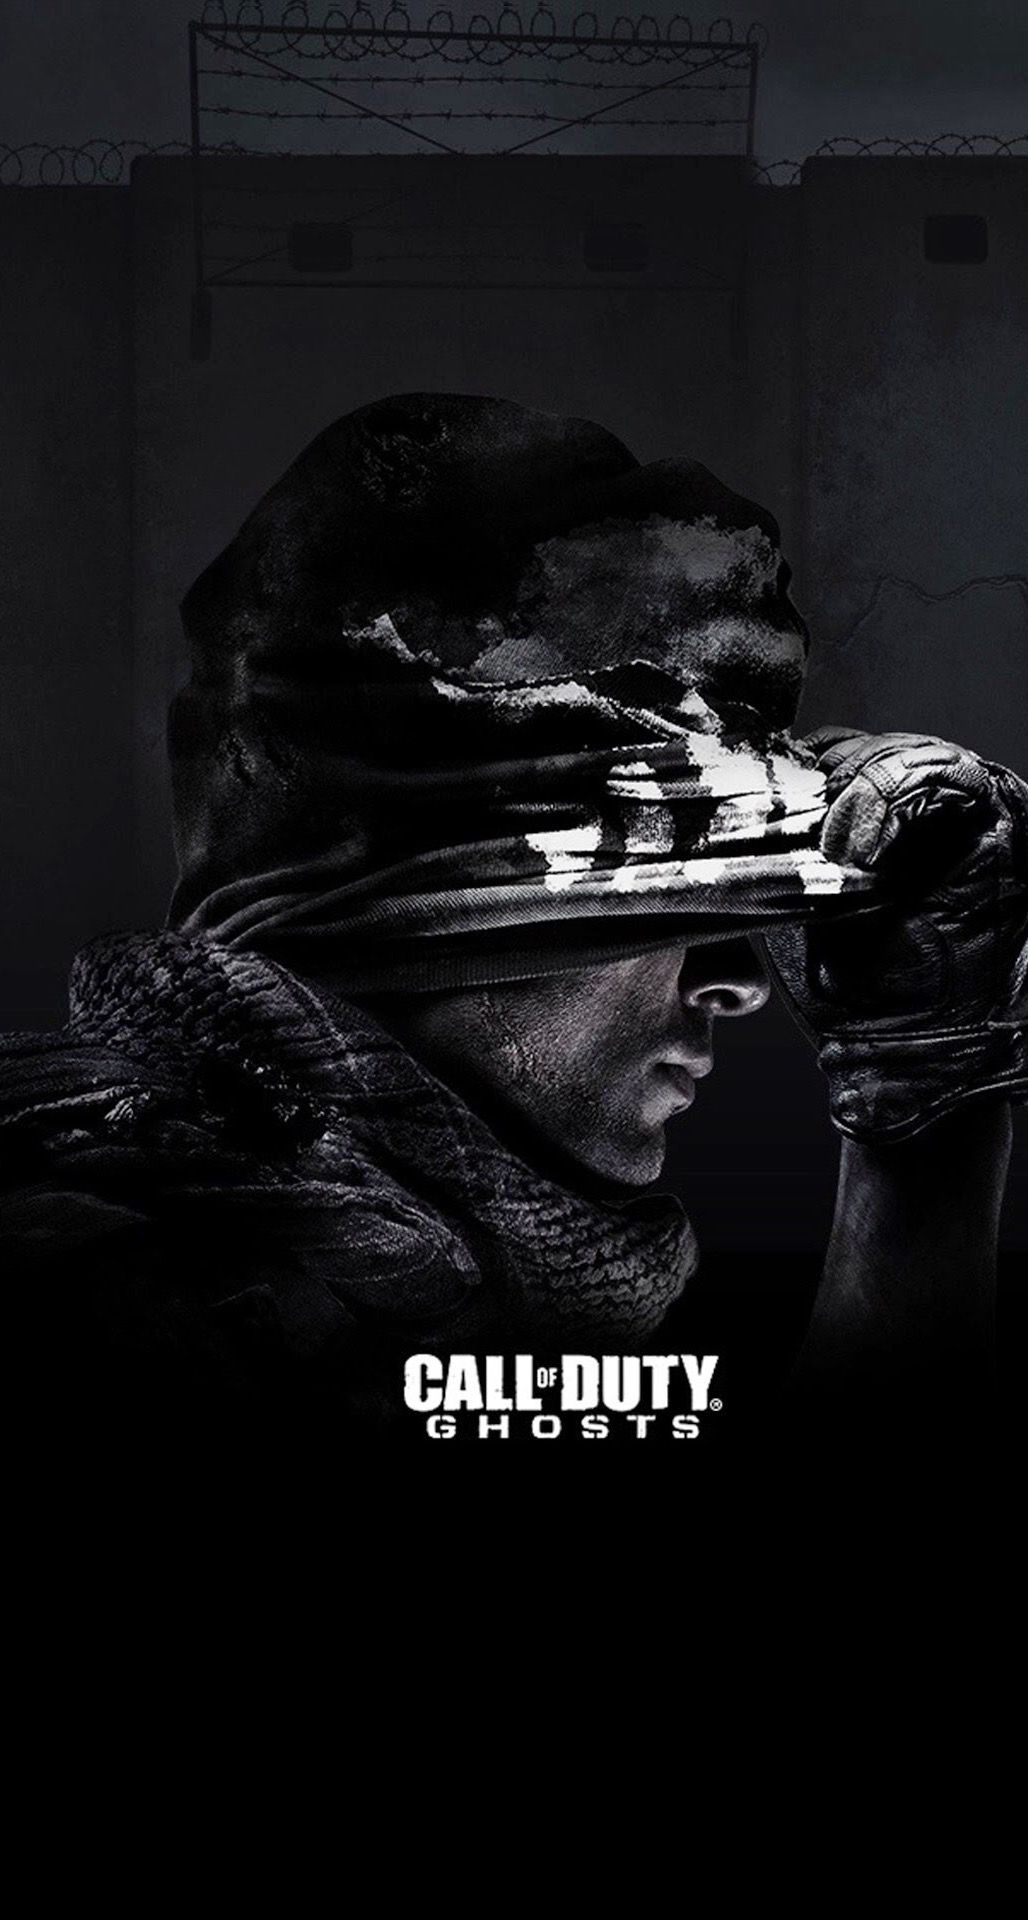 Marvelous Game iPhone Wallpaper For Gamers. Call of duty ghosts, Call of duty, Call of duty black